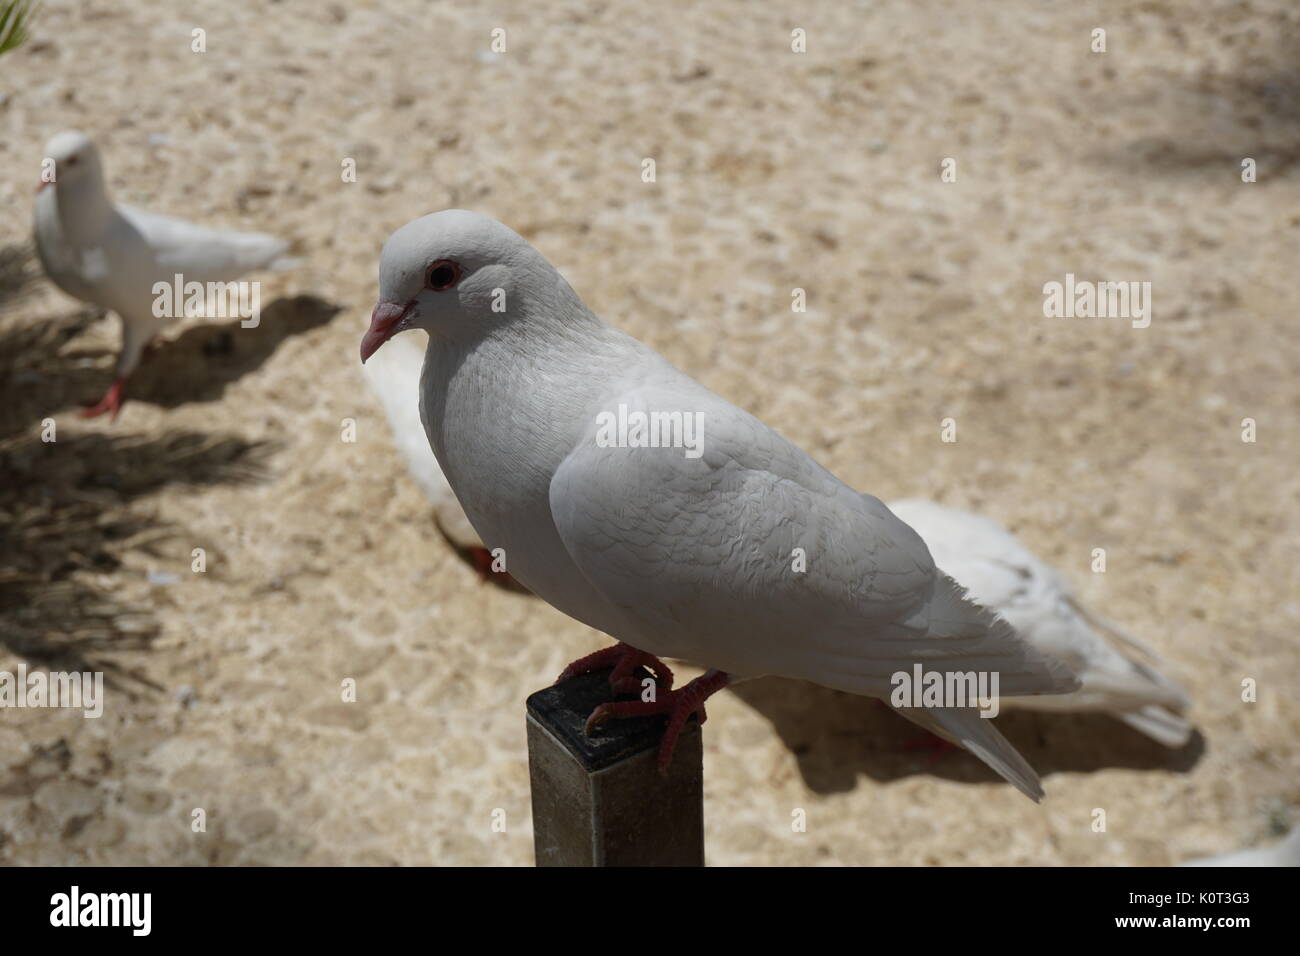 Pure white dove sitting on a fence Stock Photo